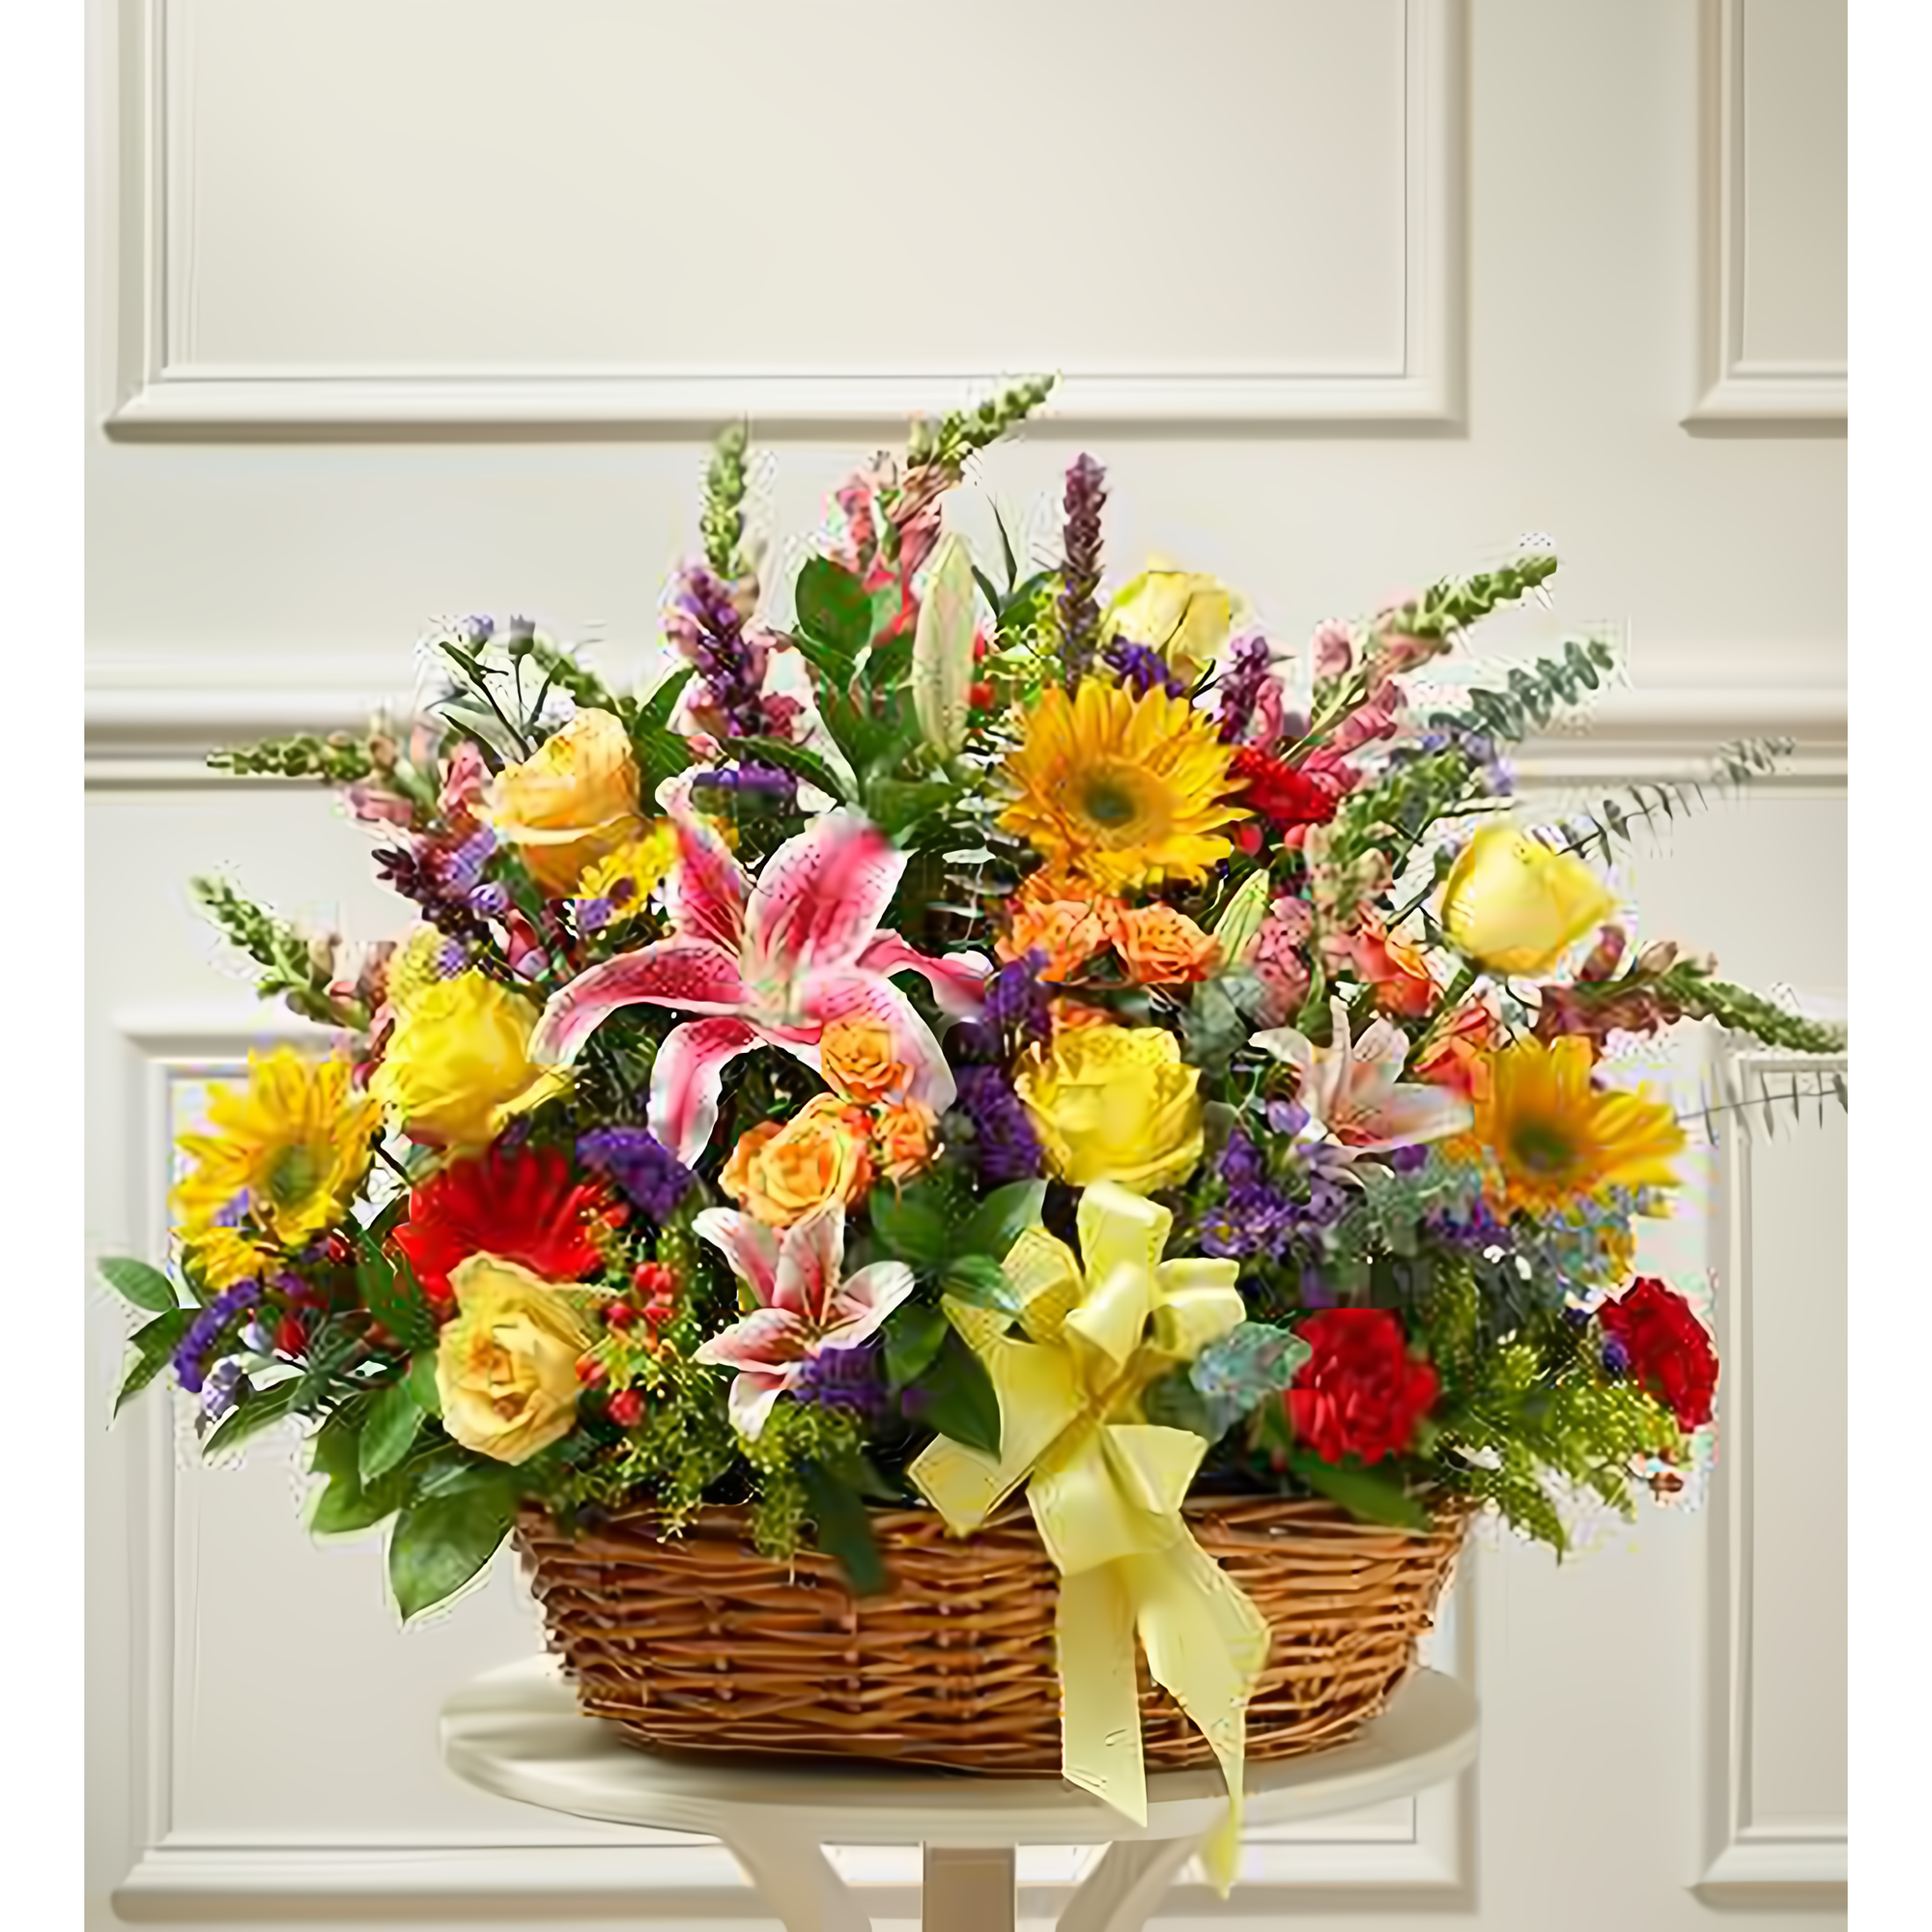 NYC Flower Delivery - Bright Flower Sympathy Arrangement in Basket - Funeral > For the Service